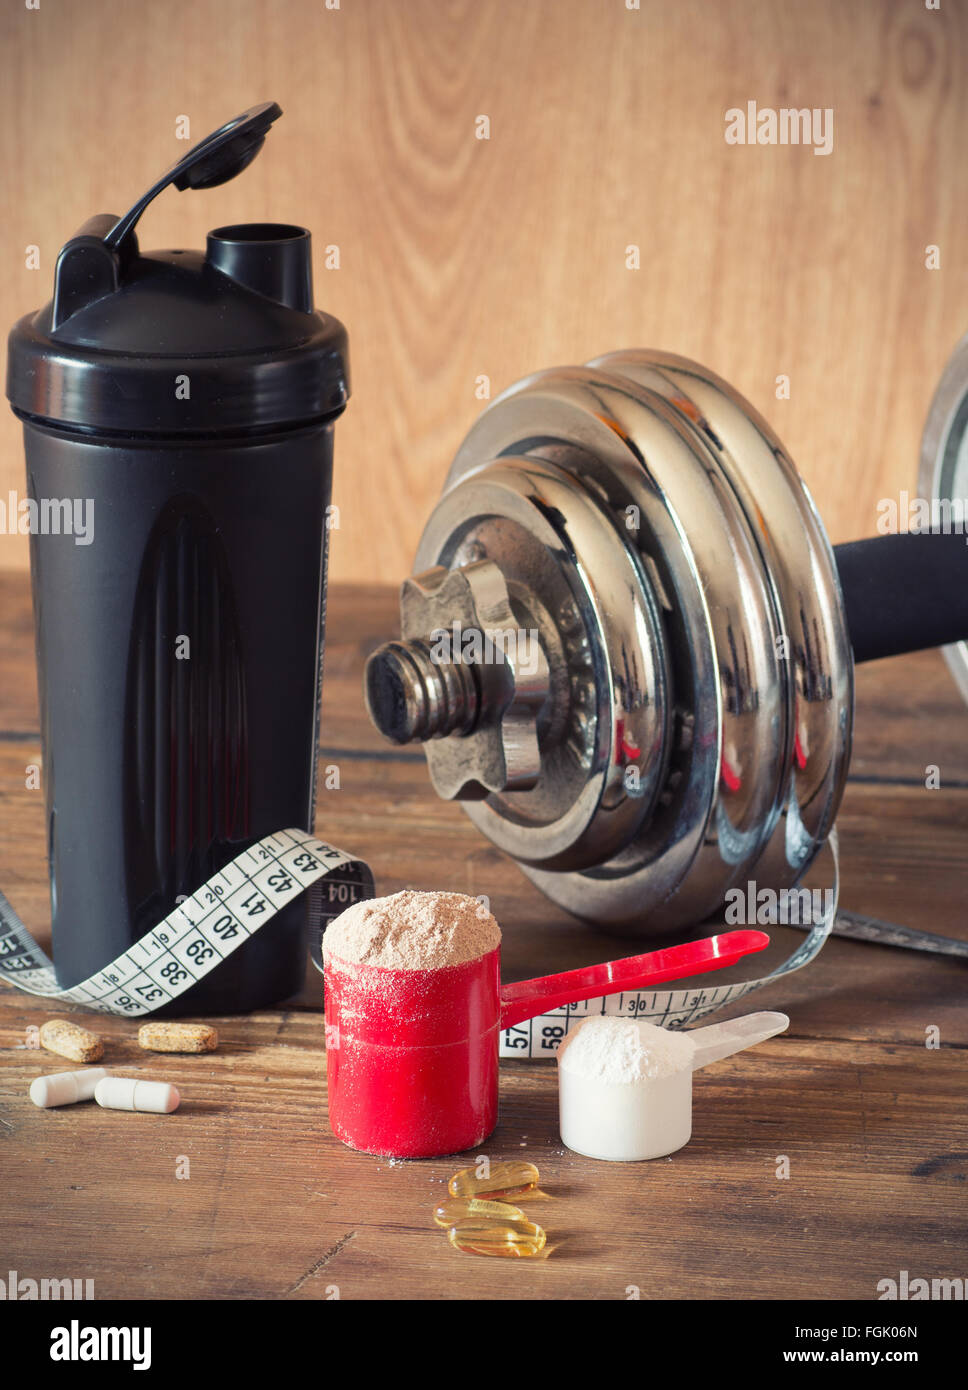 https://c8.alamy.com/comp/FGK06N/whey-protein-powder-in-scoop-with-vitamins-and-plastic-shaker-on-wooden-FGK06N.jpg